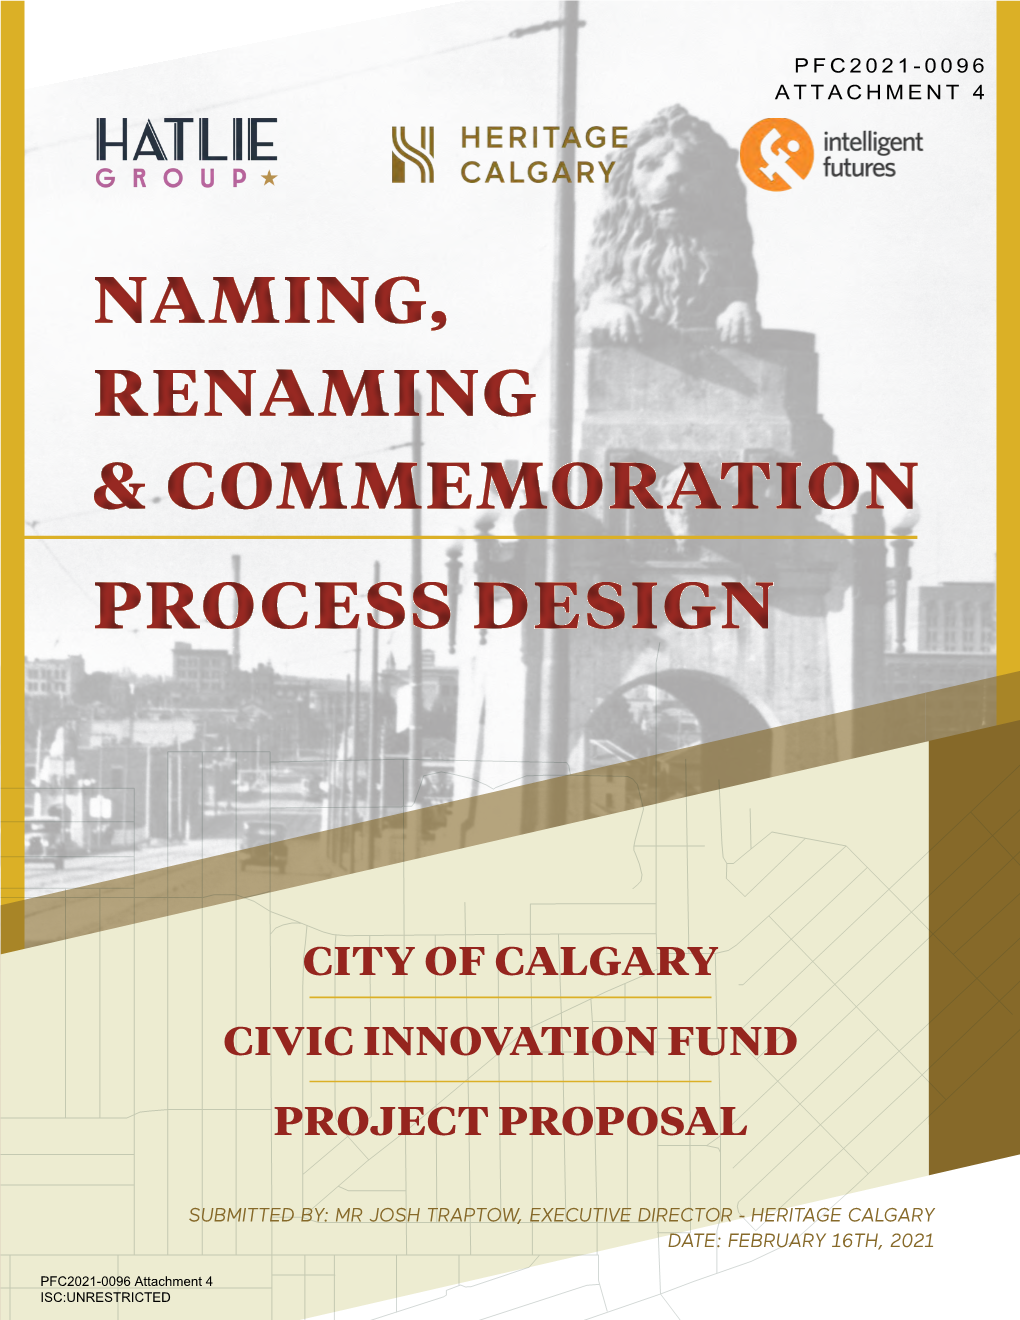 Why Heritage Calgary? PAGE 6 3 Project Scope PAGE 7 4 Project Partners PAGE 10 5 Project Budget & Timeline PAGE 11